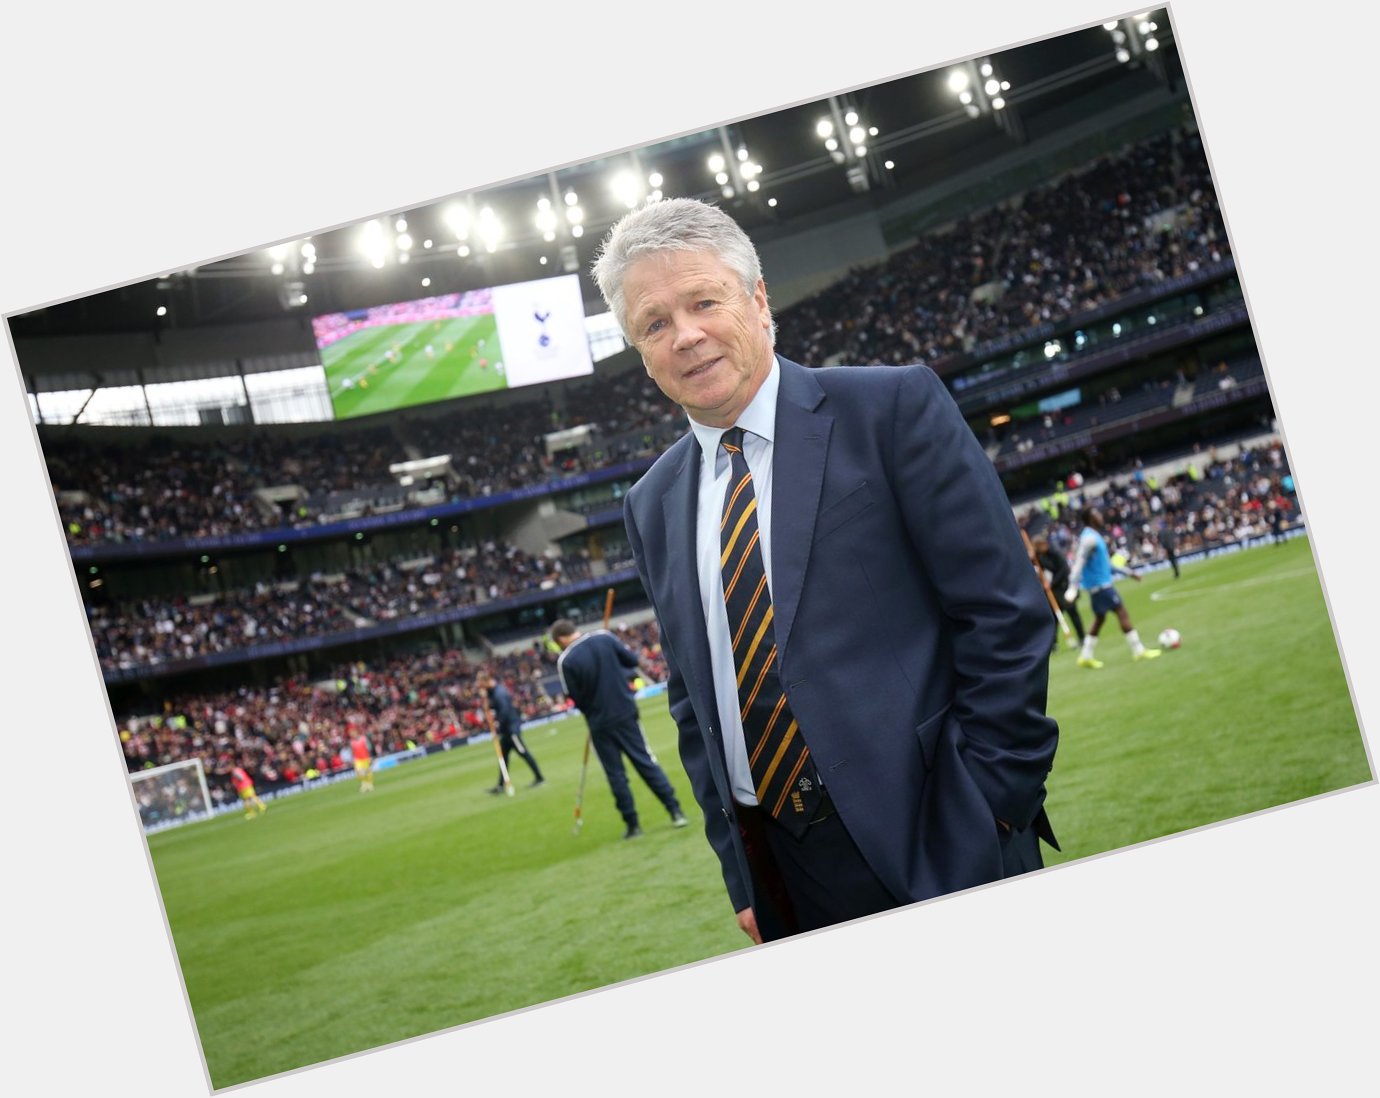    A big happy birthday to the one and only, Steve Perryman!     